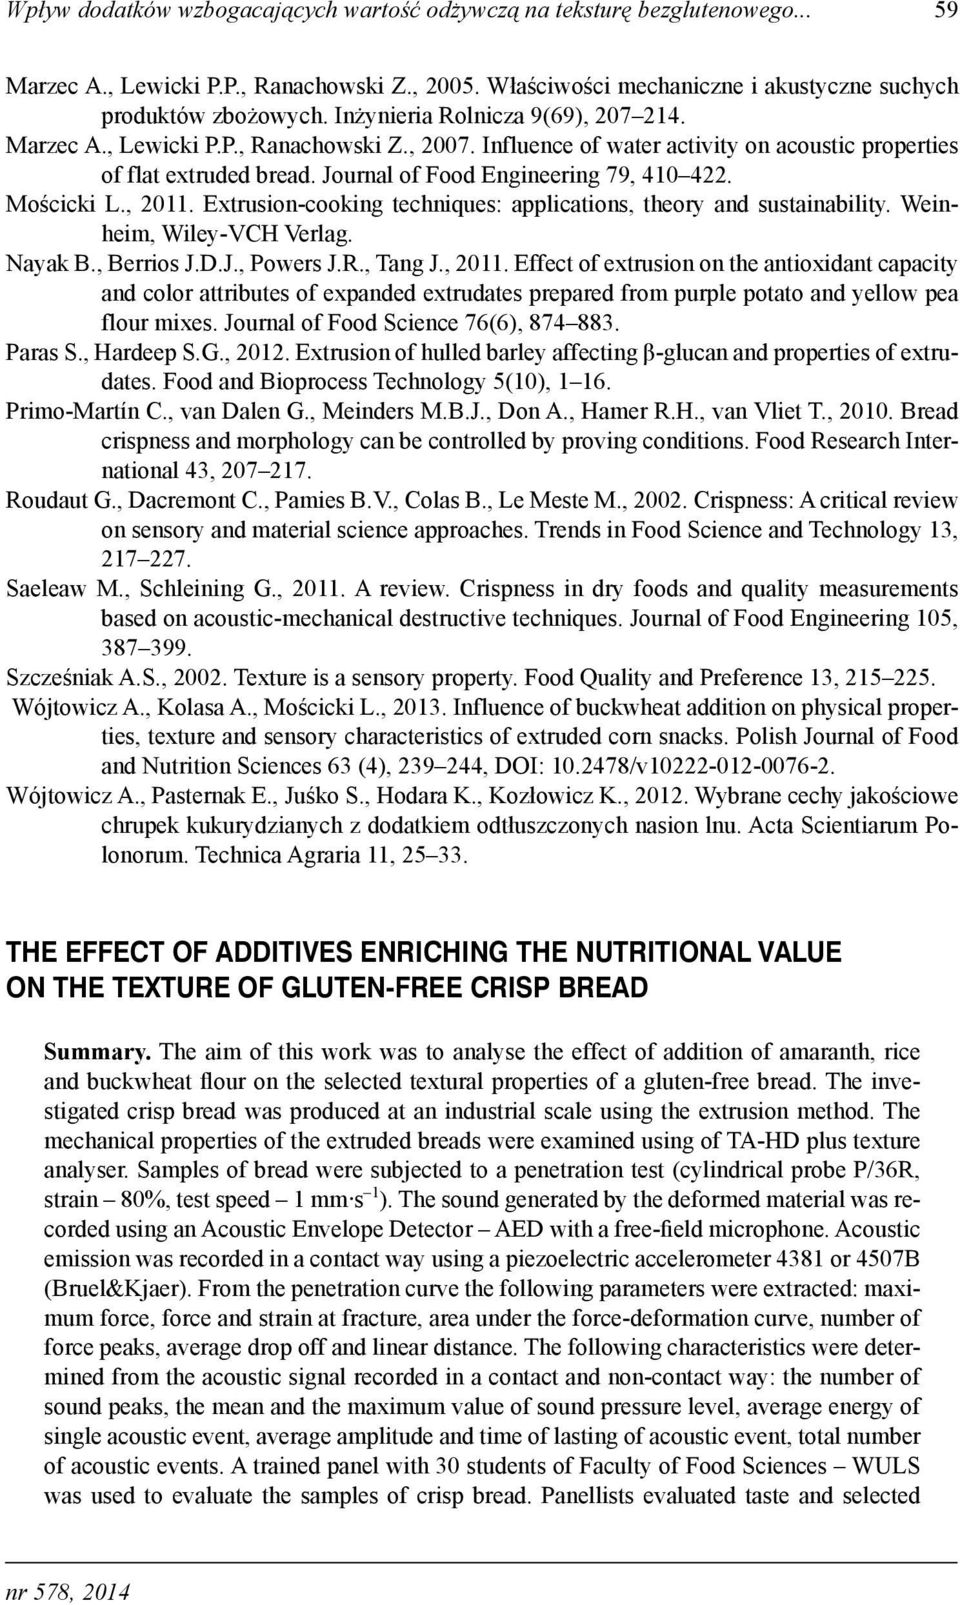 Mościcki L., 2011. Extrusion-cooking techniques: applications, theory and sustainability. Weinheim, Wiley-VCH Verlag. Nayak B., Berrios J.D.J., Powers J.R., Tang J., 2011. Effect of extrusion on the antioxidant capacity and color attributes of expanded extrudates prepared from purple potato and yellow pea flour mixes.